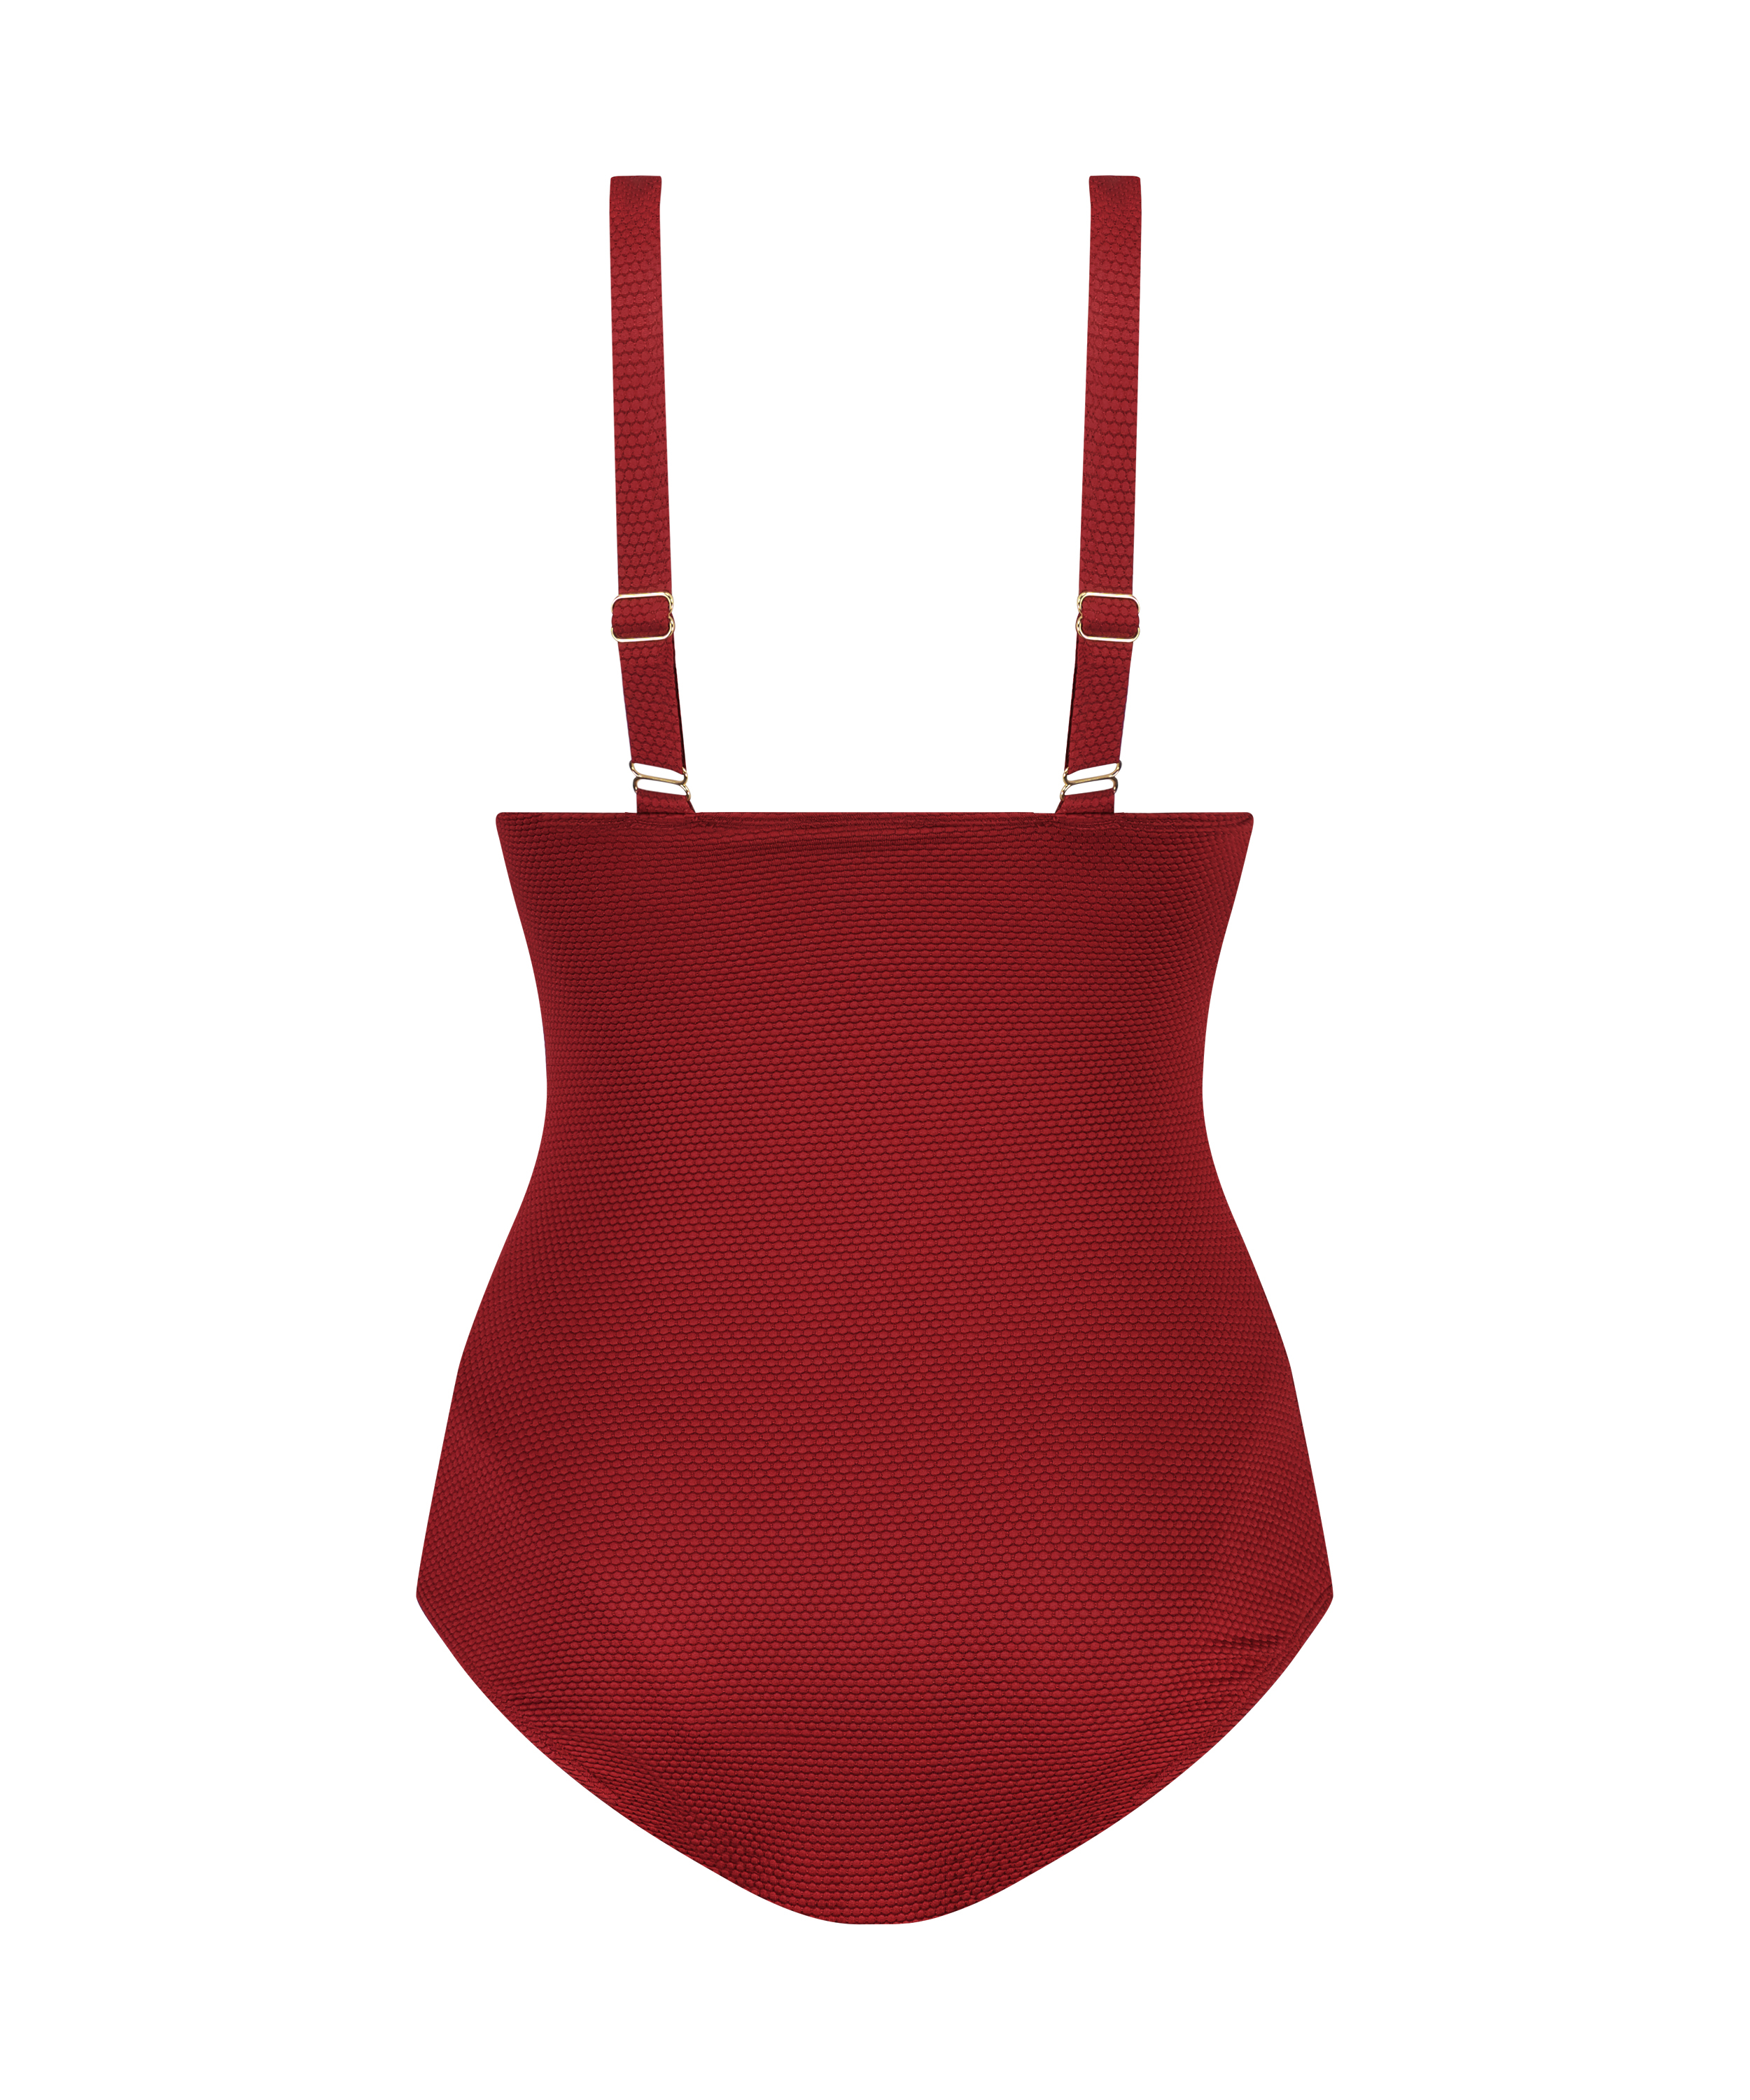 Scallop swimsuit, Red, main